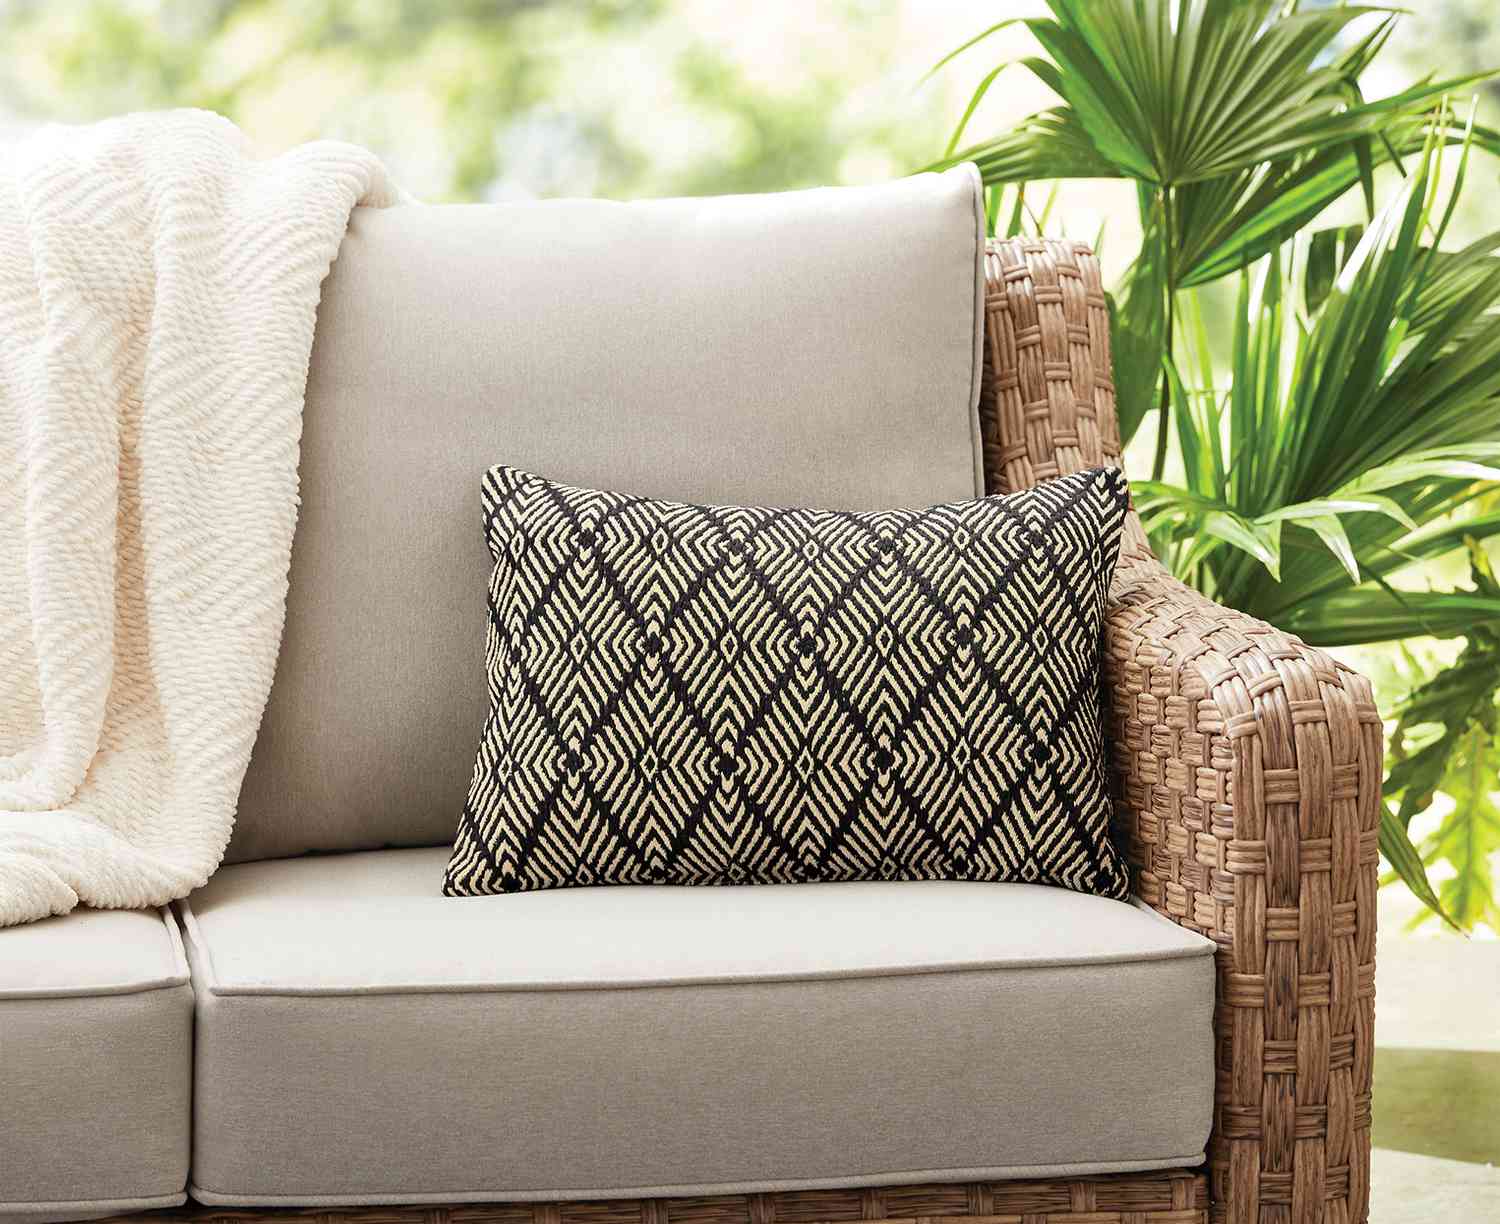 Outdoor Pillows To Spruce Up Your Patio, Better Homes And Gardens Patio Furniture Cushion Covers